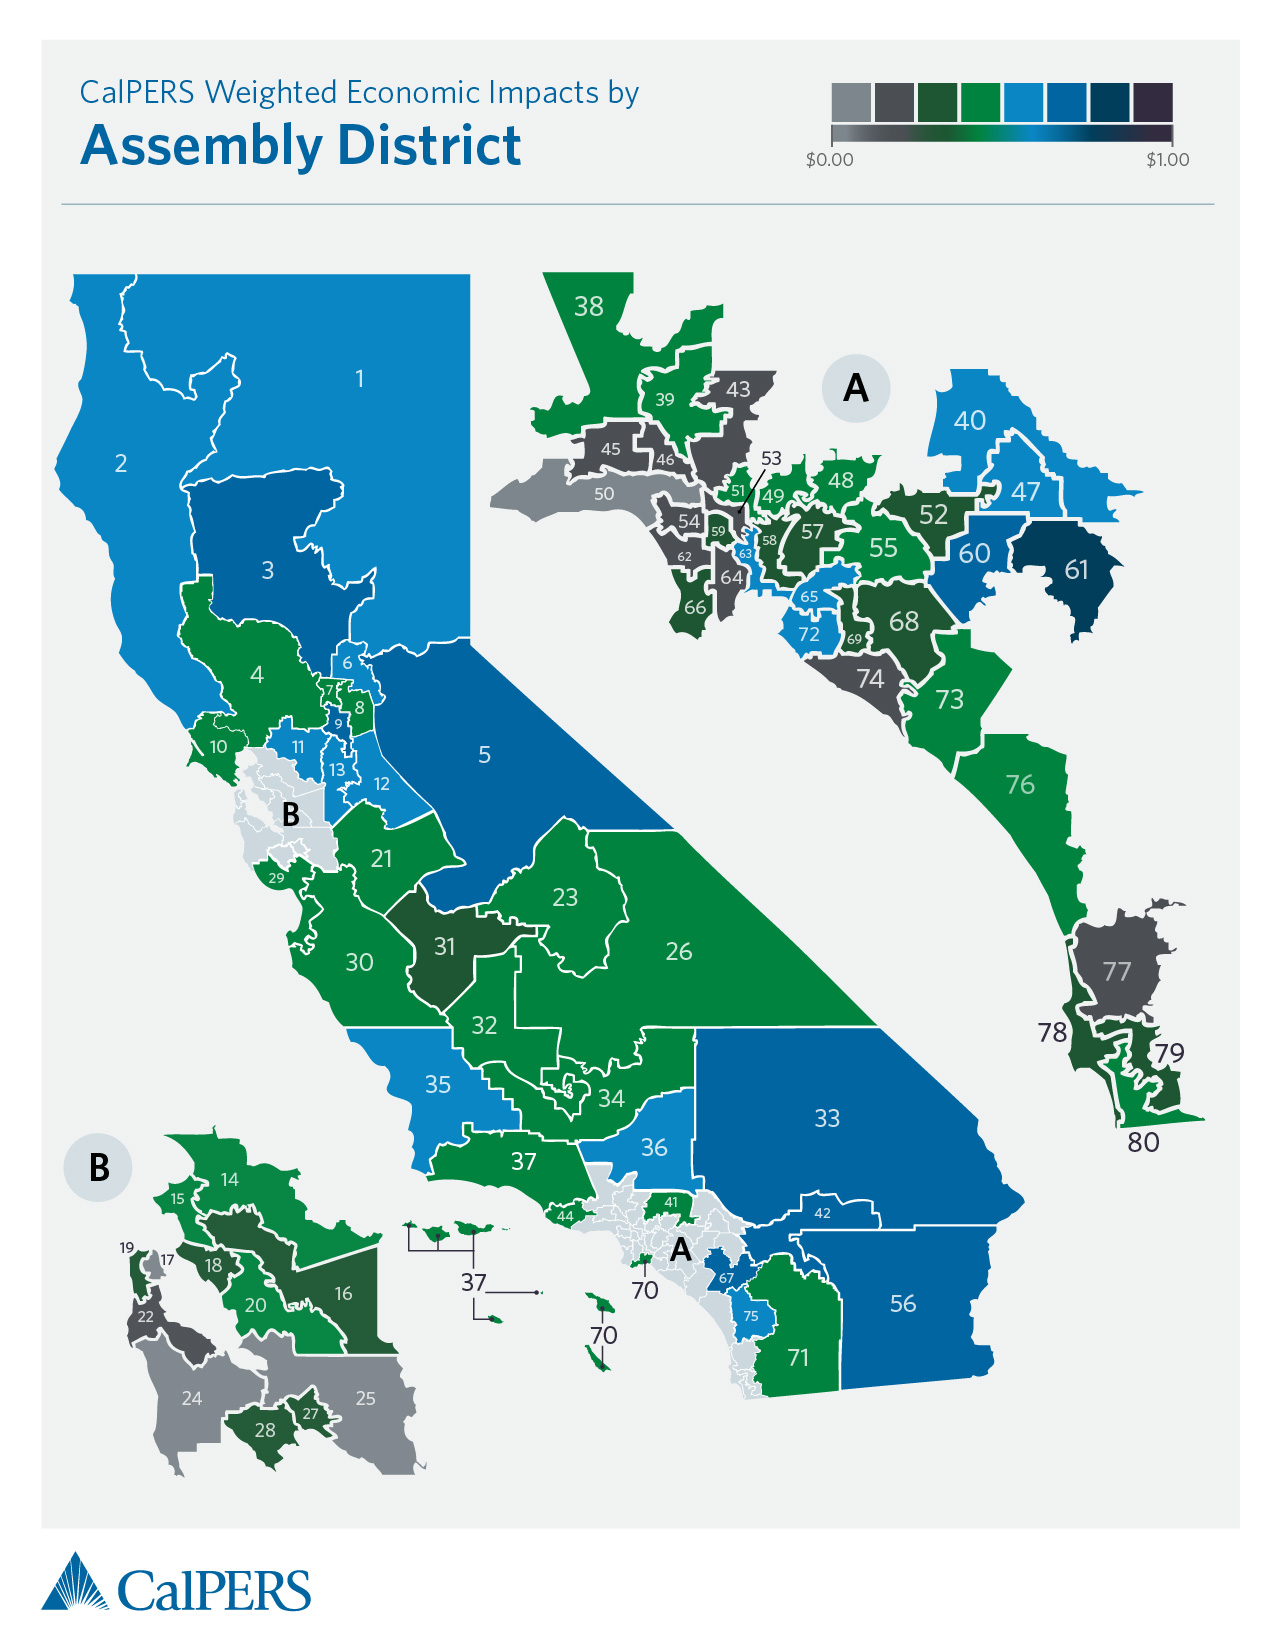 CalPERS Economic Impacts of Benefit Payments by Assembly District